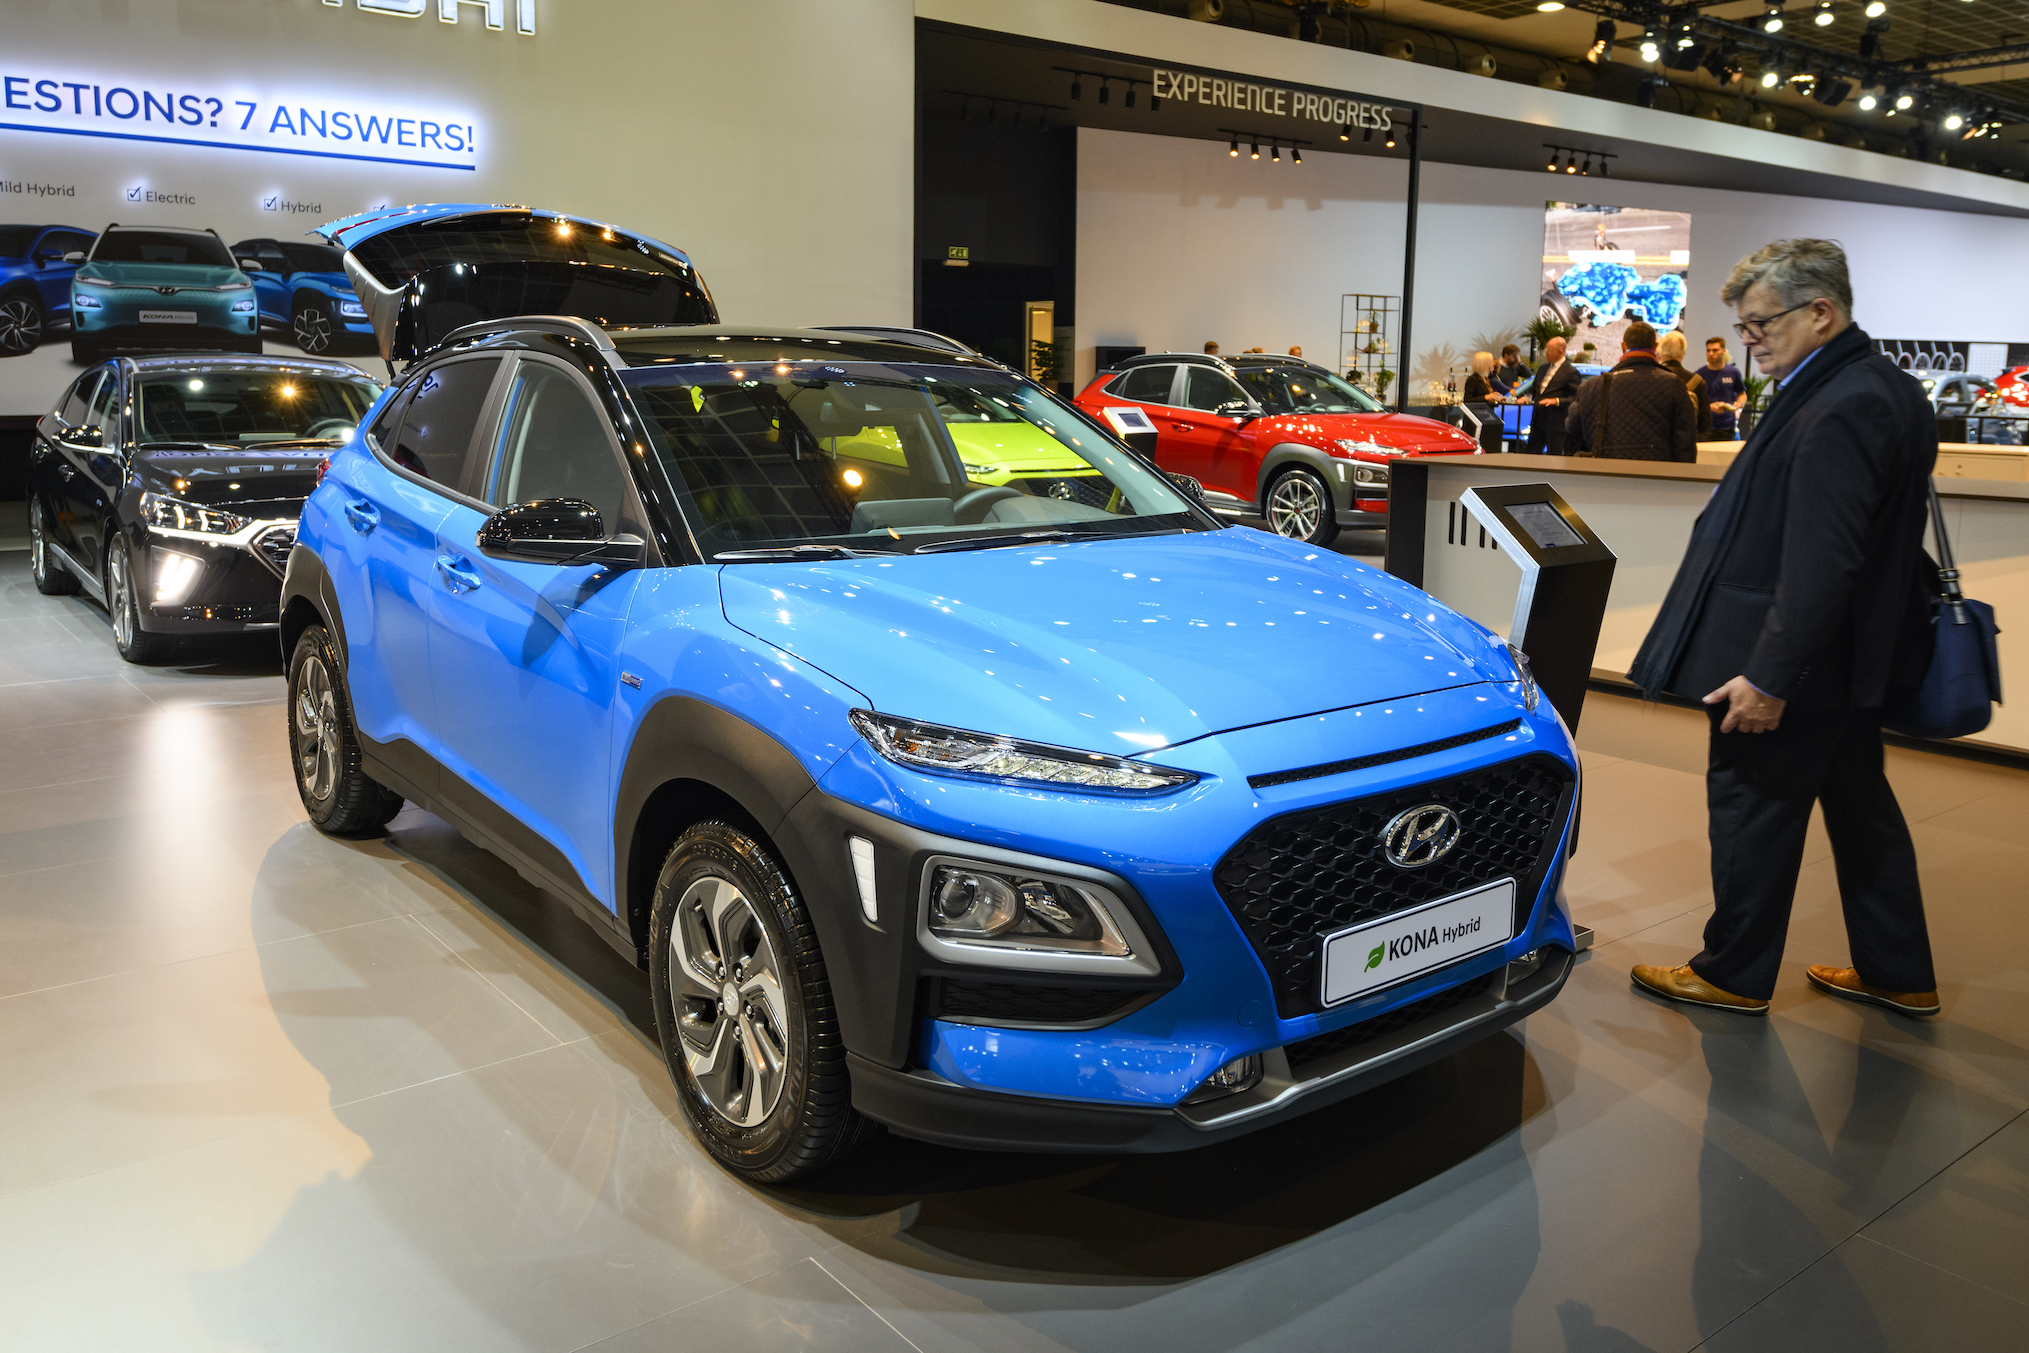 Hyundai Kona Hybrid compact crossover suv on display at Brussels Expo